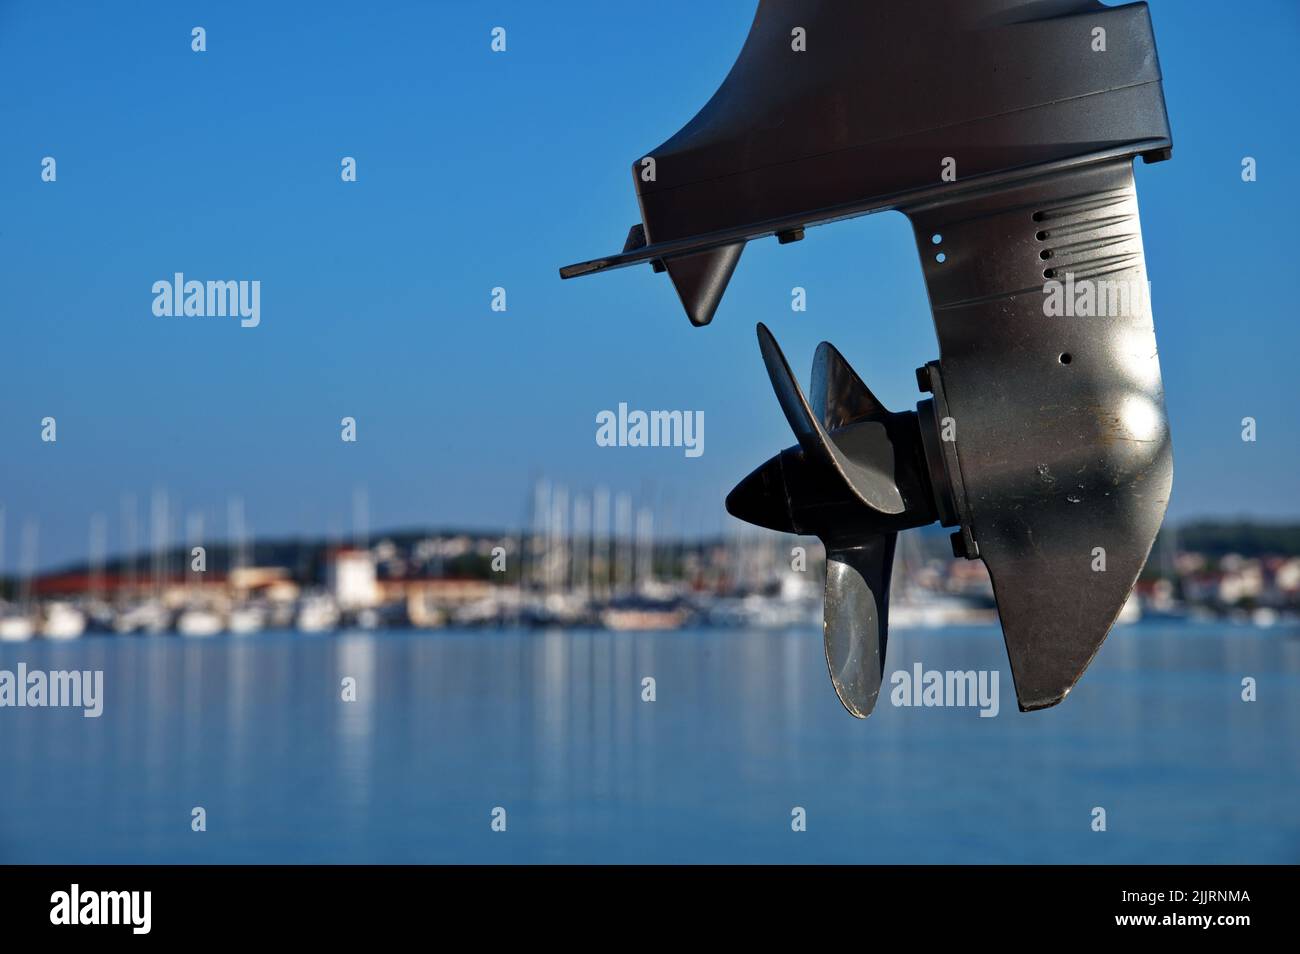 Sailing boat propeller against blue sea Stock Photo